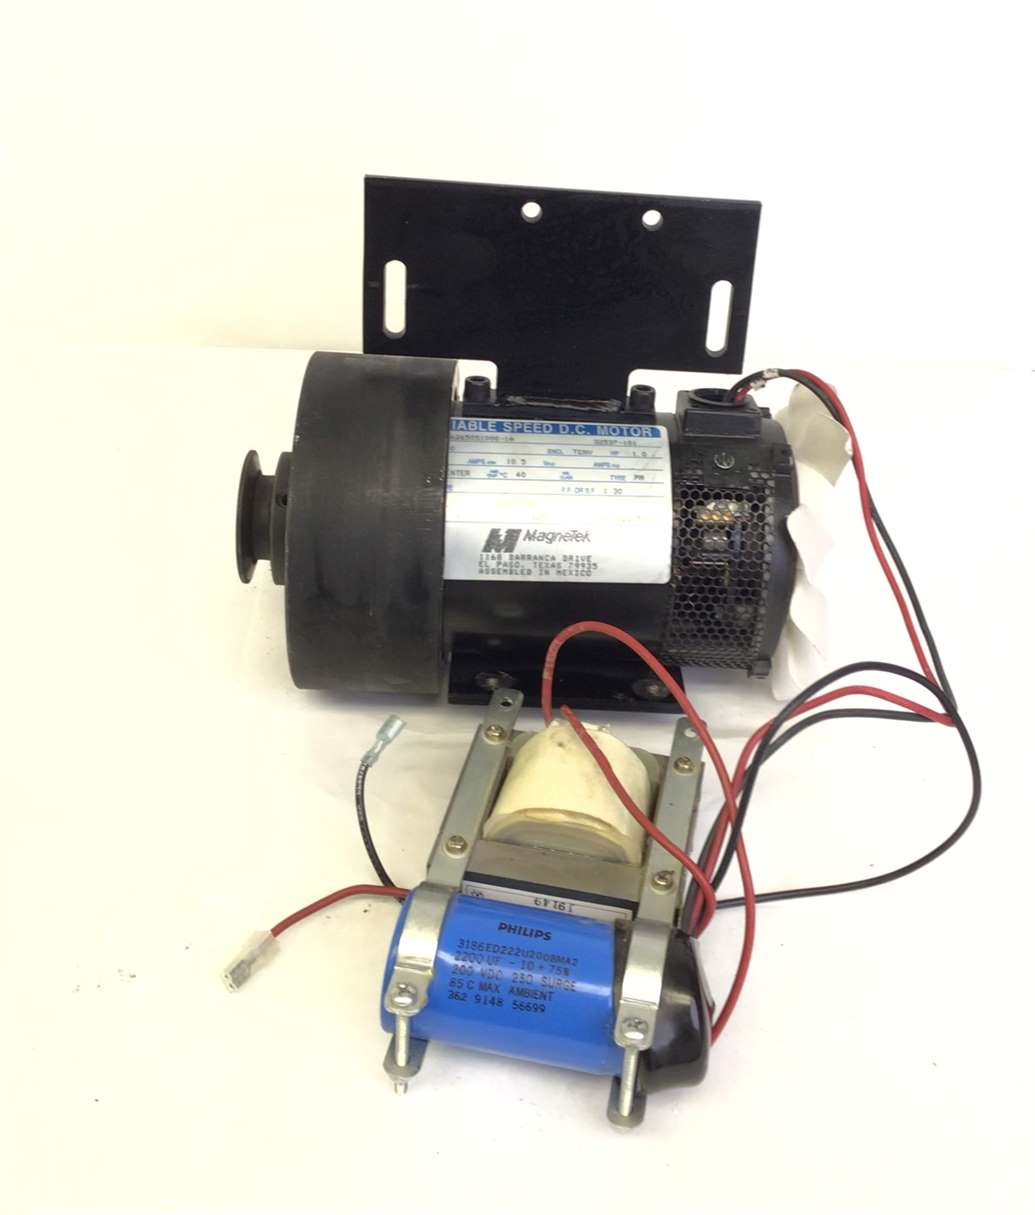 32537-101 46265051000-1A Magnetek Drive Motor w Transformer and Capacitor (Used)